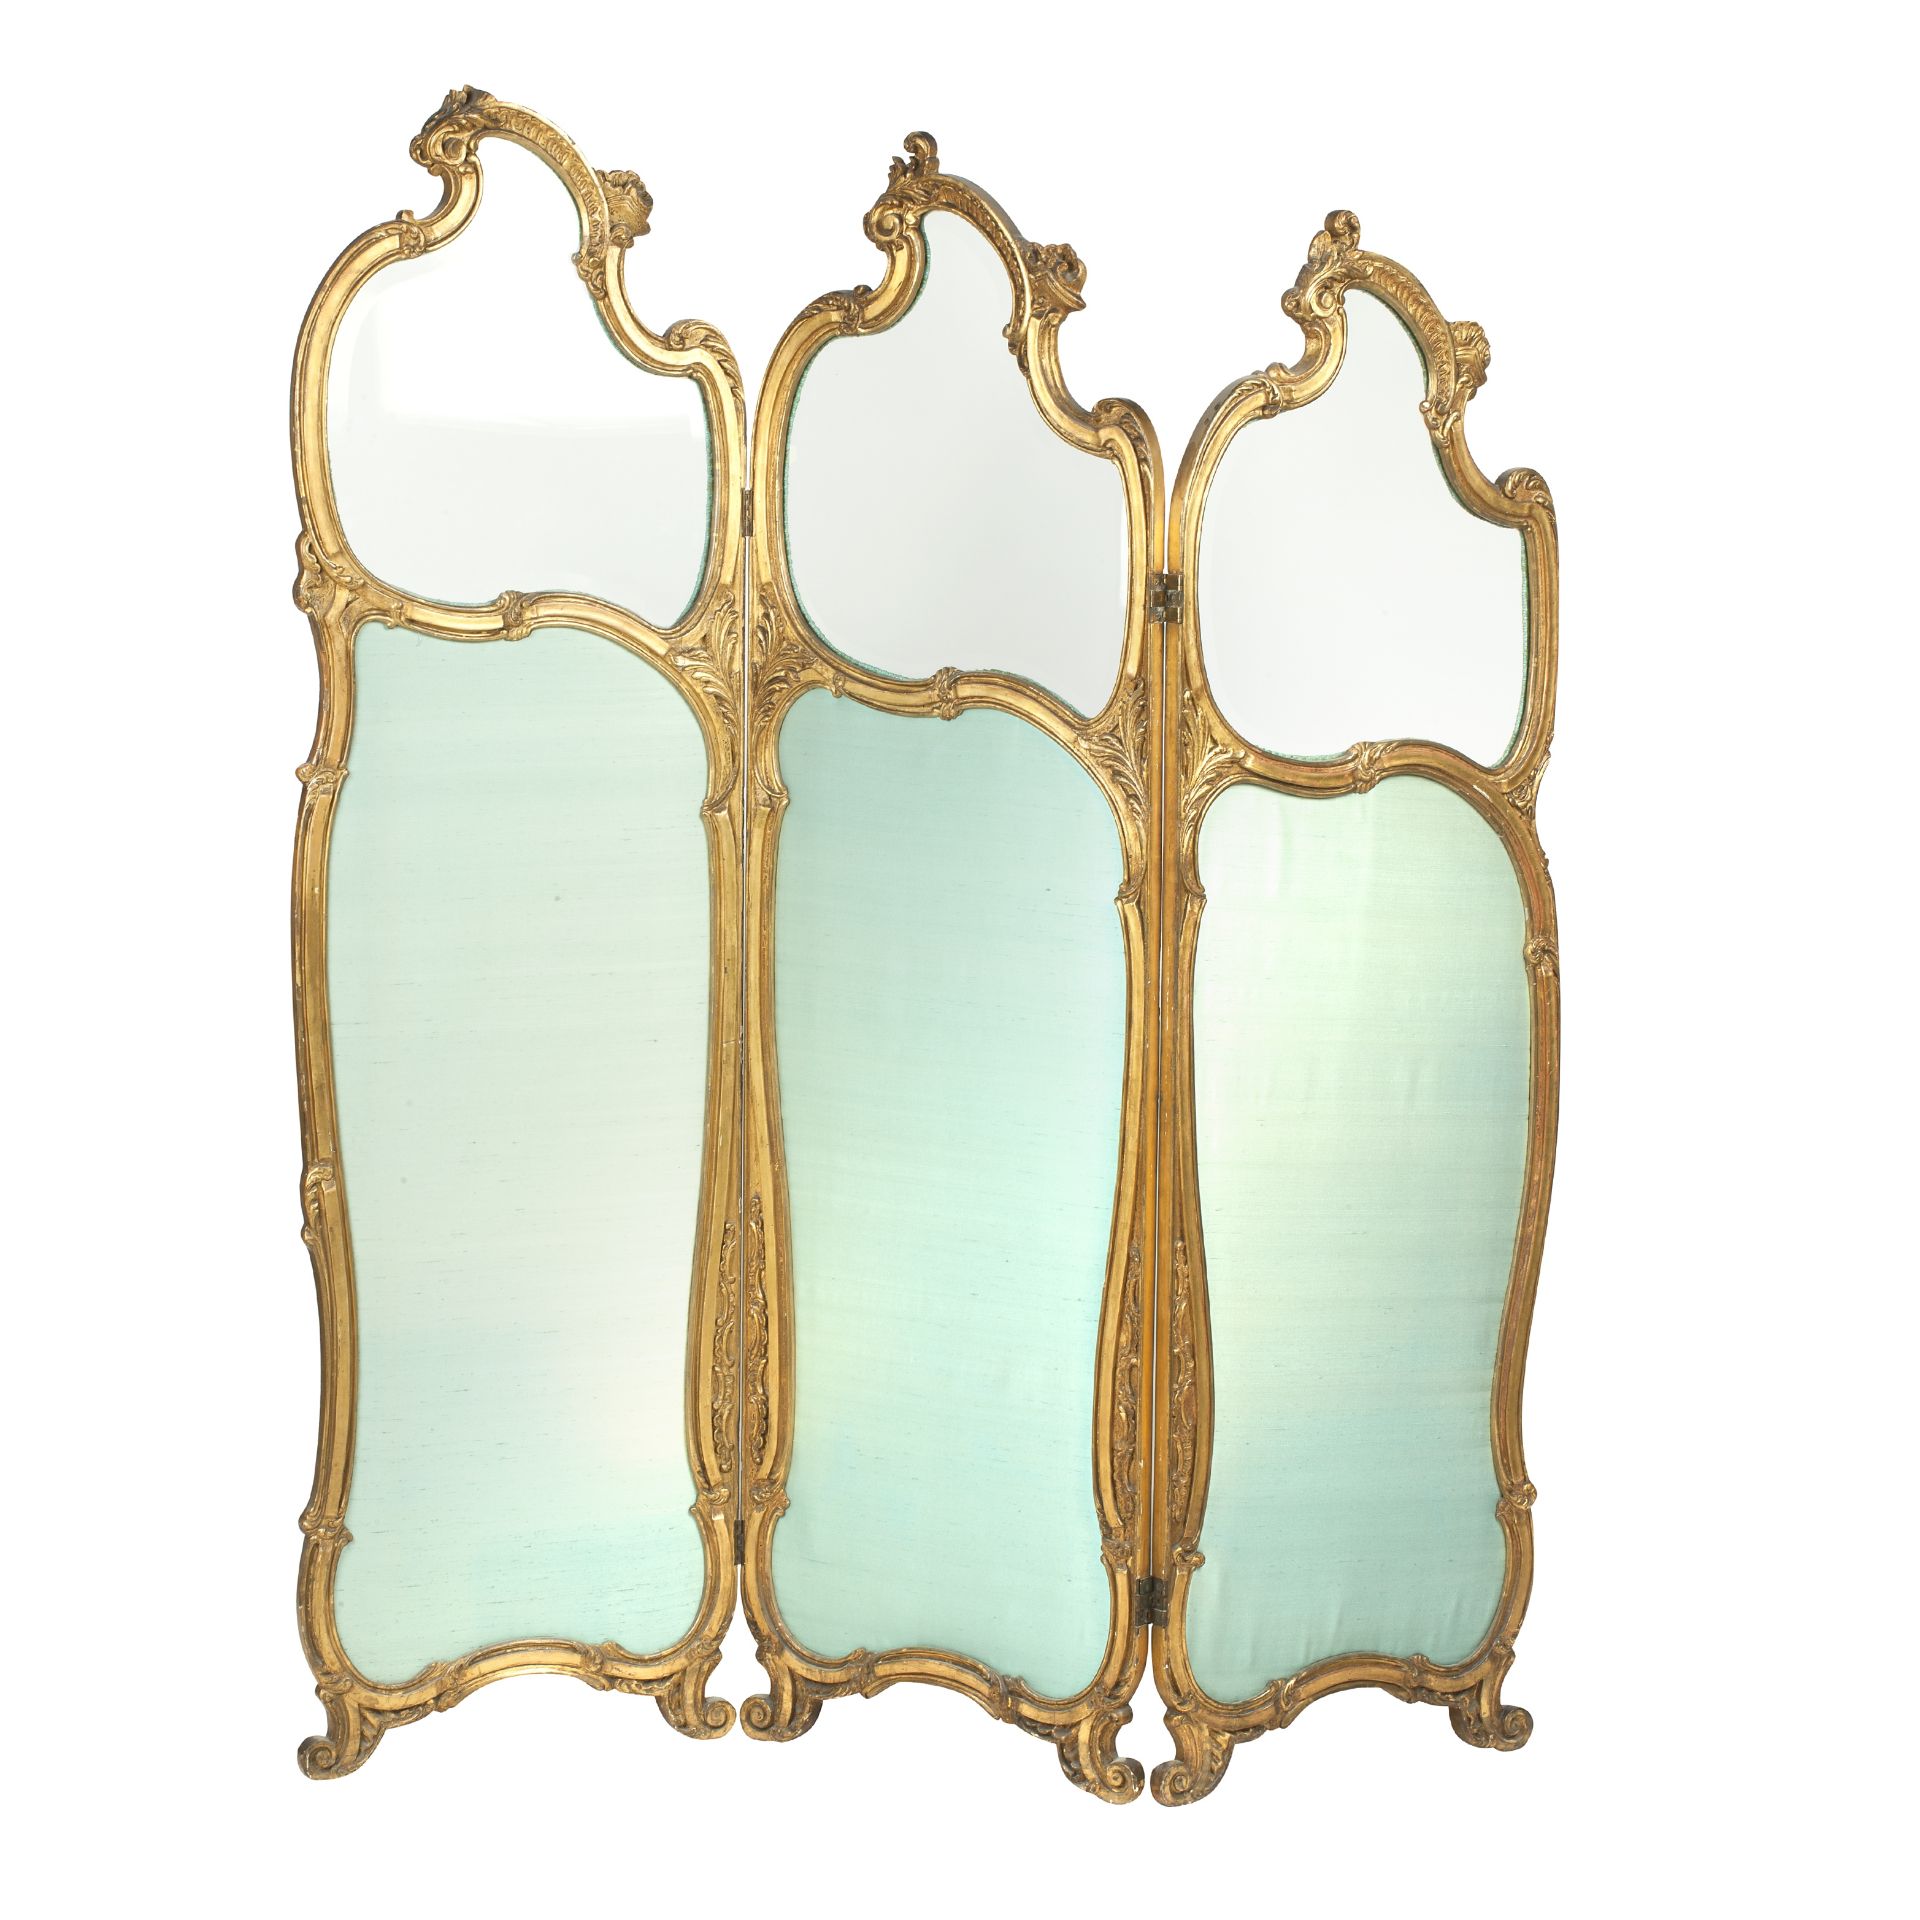 A late 19th/early 20th century French giltwood, glass and silk three-fold screen